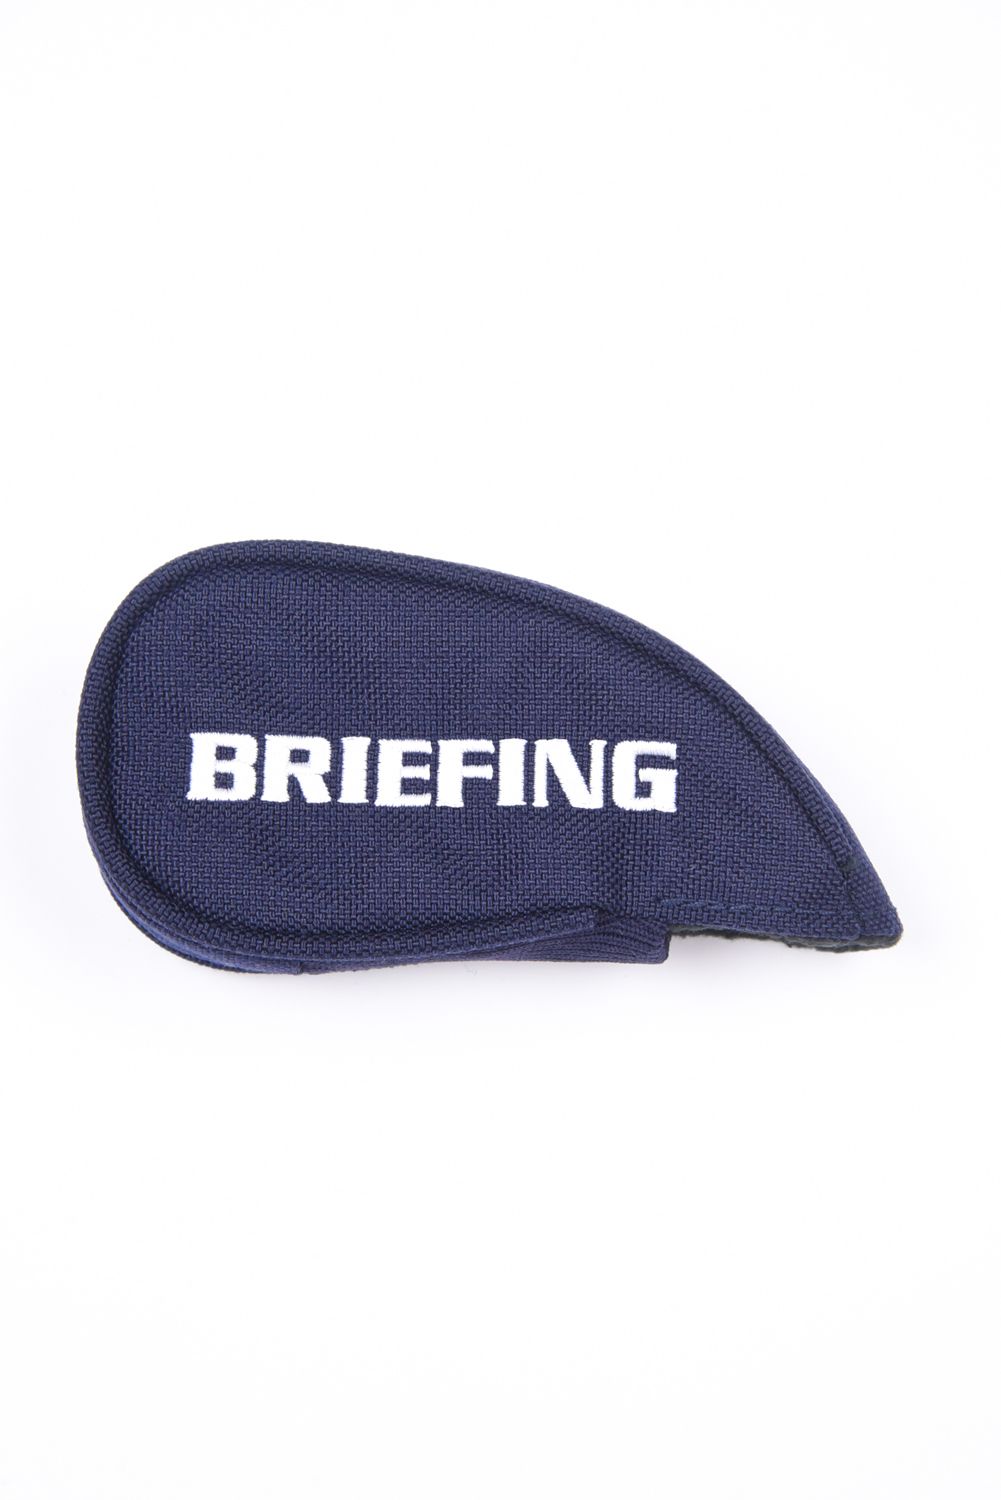 BRIEFING - 【STANDARD SERIES】 SEPARATE IRON COVER 1000D 